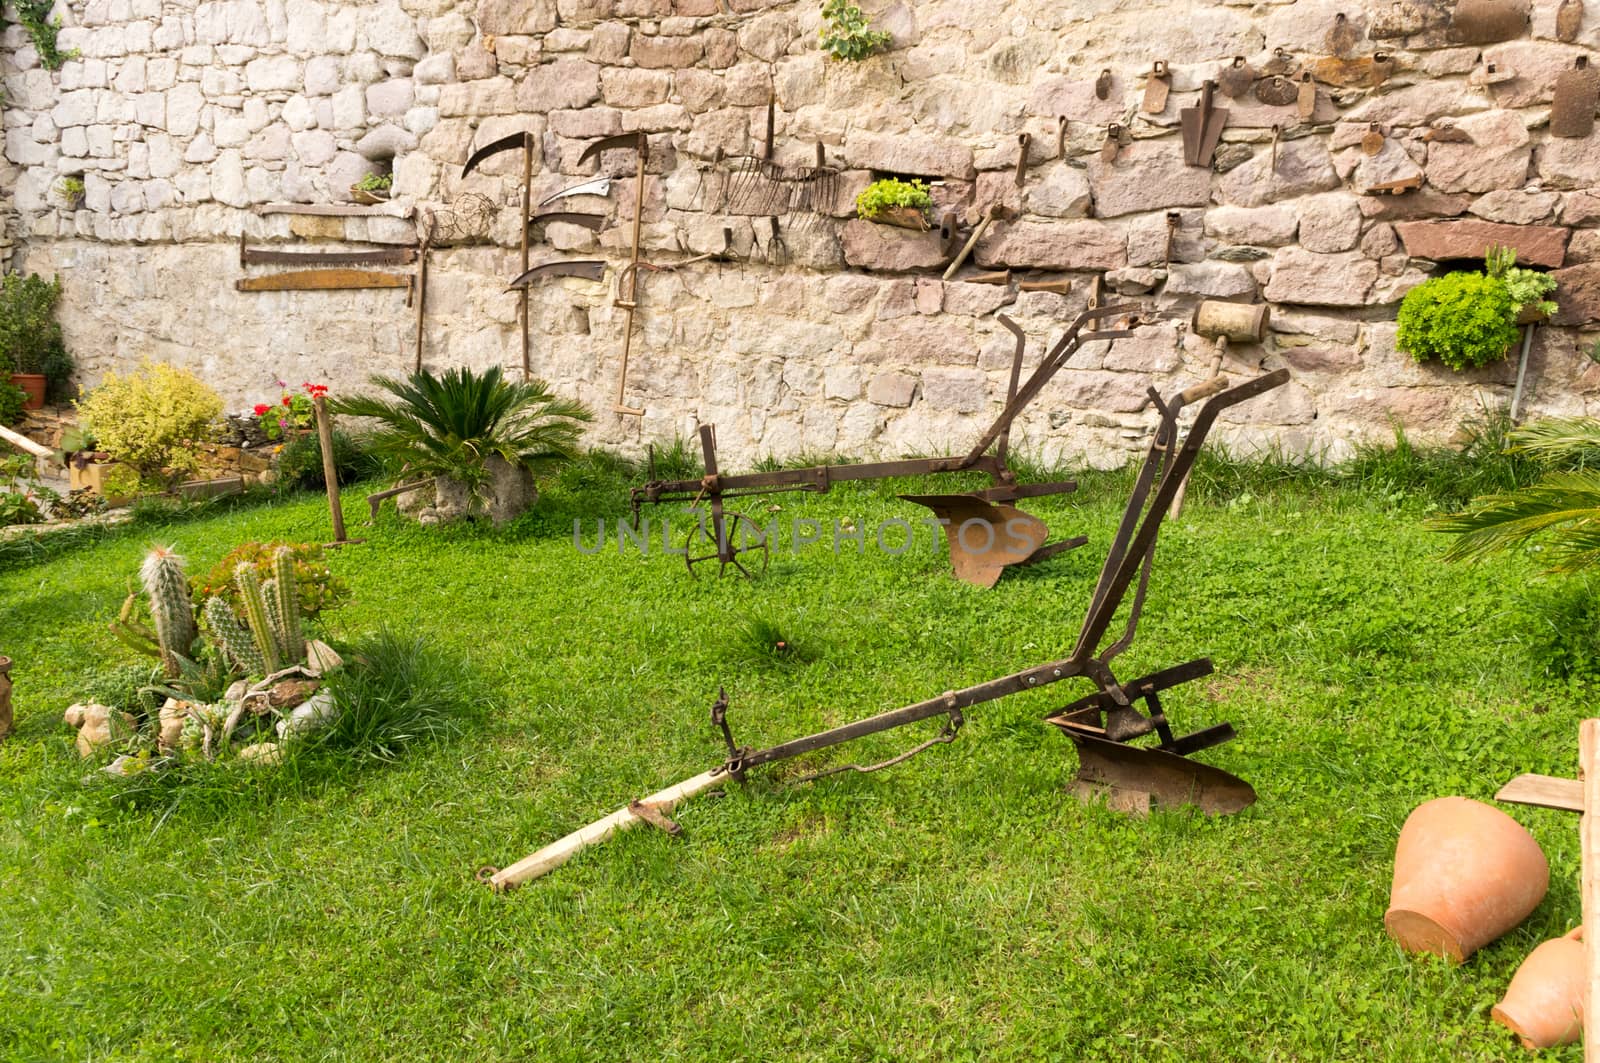 Plow and old gardening tools in a green meadow